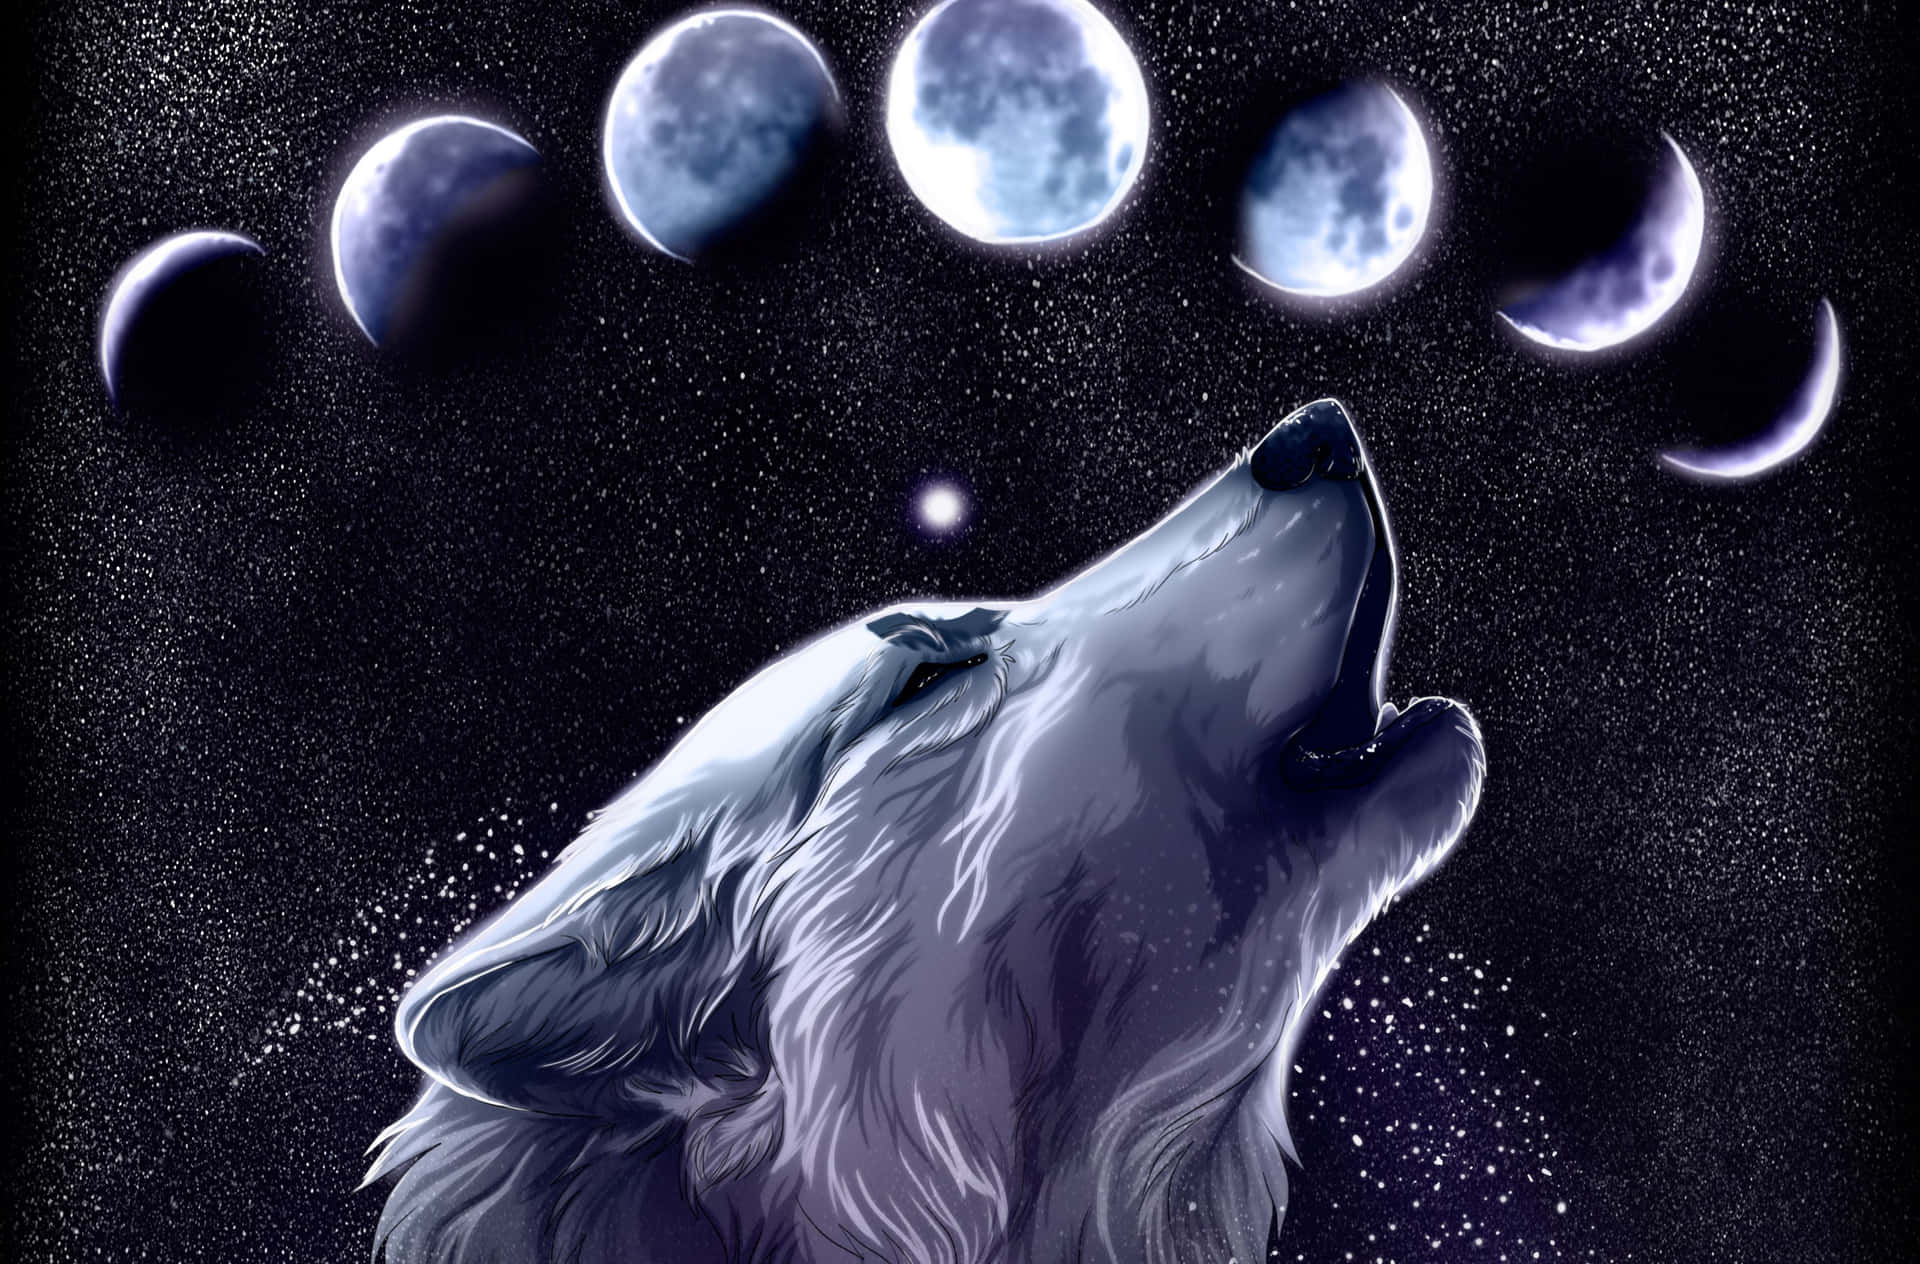 The majestic Galaxy Wolves, gazing up at the starry night sky. Wallpaper